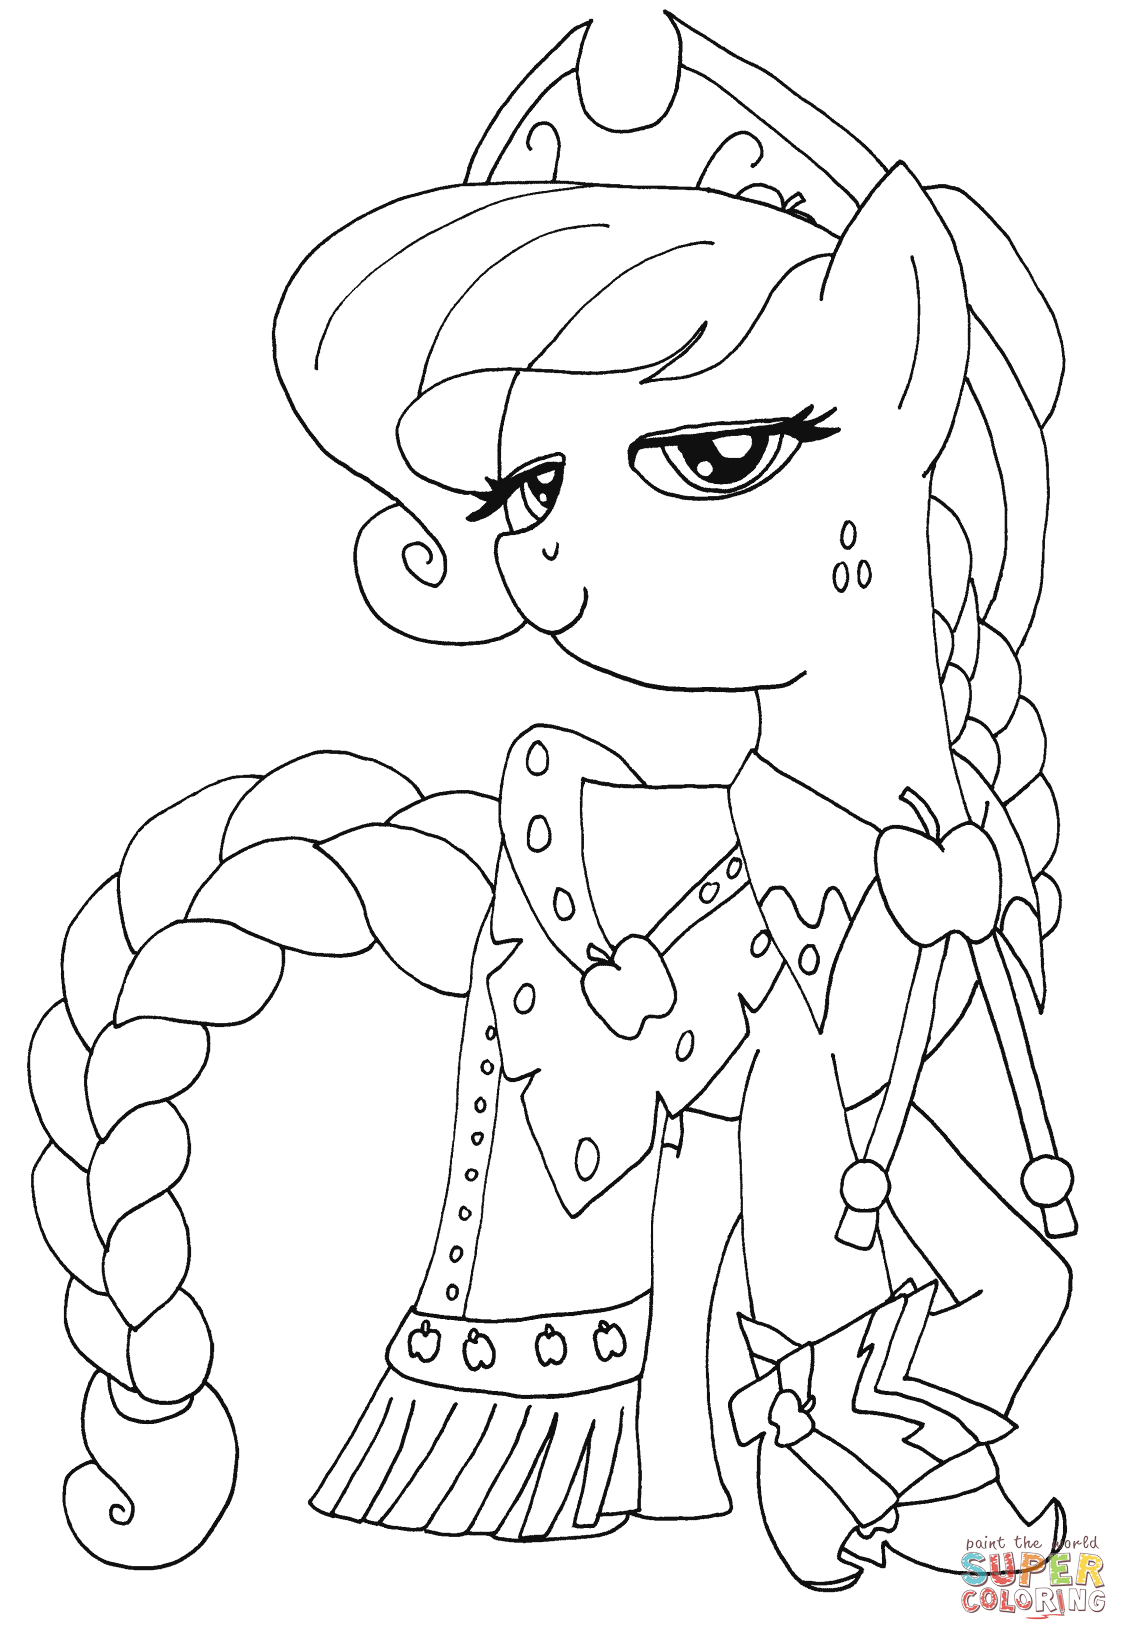 Princess Applejack coloring page | Free Printable Coloring Pages